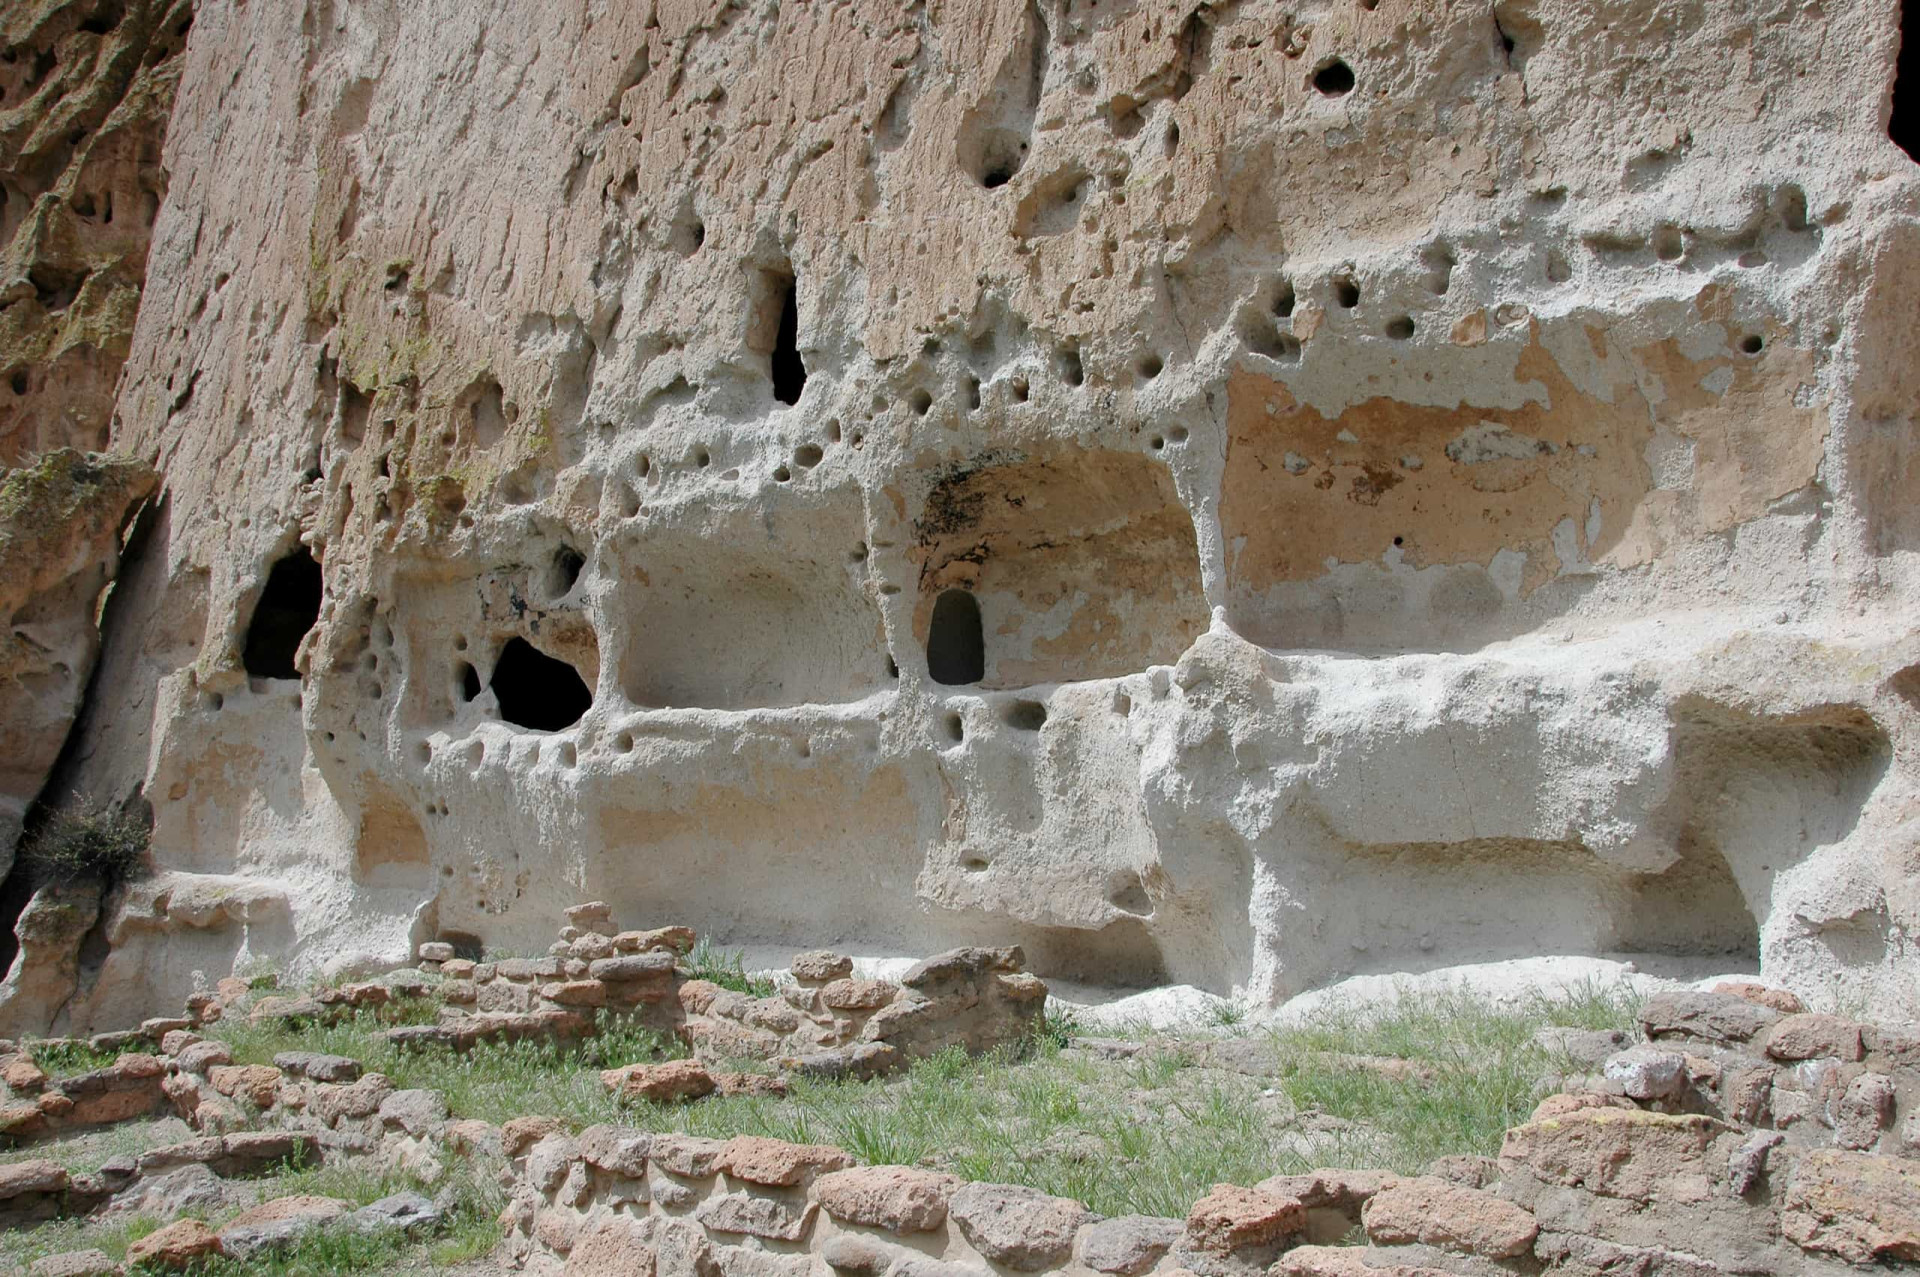 <p>The Bandelier National Monument preserves the homes of the territory of the Ancestral Puebloans, an area likely occupied from 1150 to 1600. It's possible to explore these indigenous habitats, which offer a glimpse into Pueblo culture and daily life.</p><p>You may also like:<a href="https://www.starsinsider.com/n/305376?utm_source=msn.com&utm_medium=display&utm_campaign=referral_description&utm_content=487164v6en-en"> Classic cinema's most notorious villains</a></p>